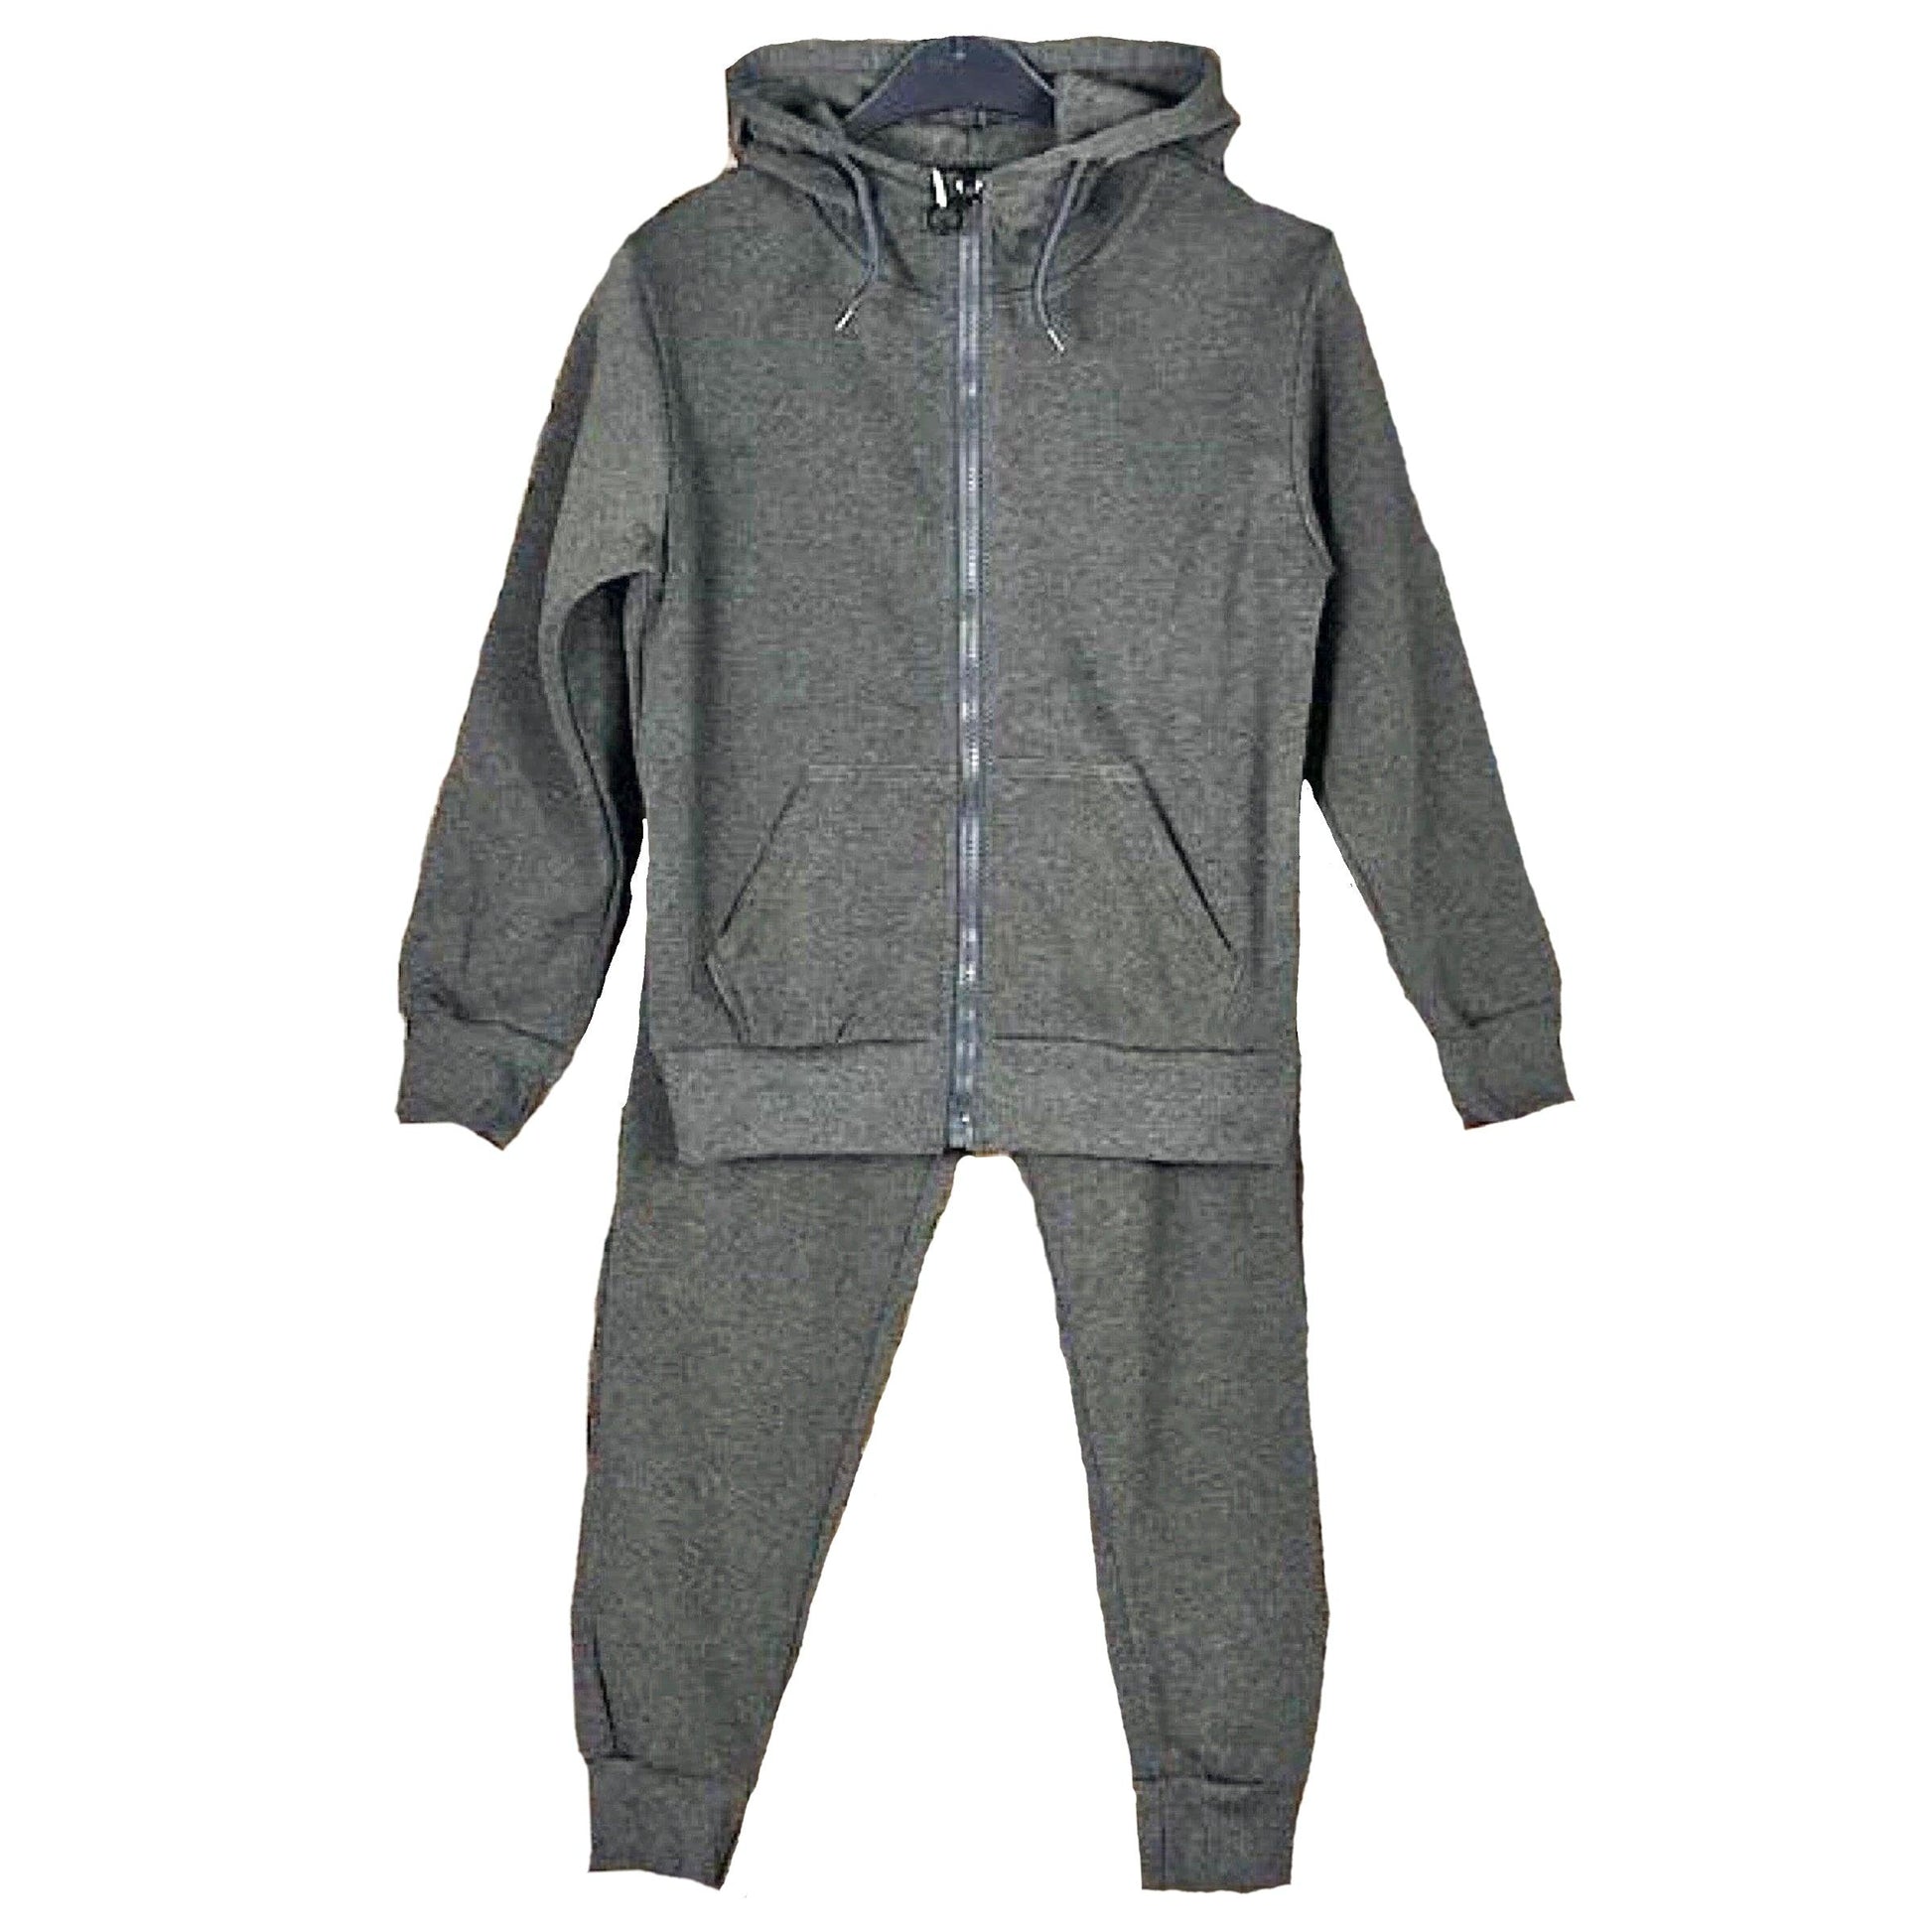 Charcoal Tracksuit Outfit | Oscar & Me | Baby & Children’s Clothing & Accessories